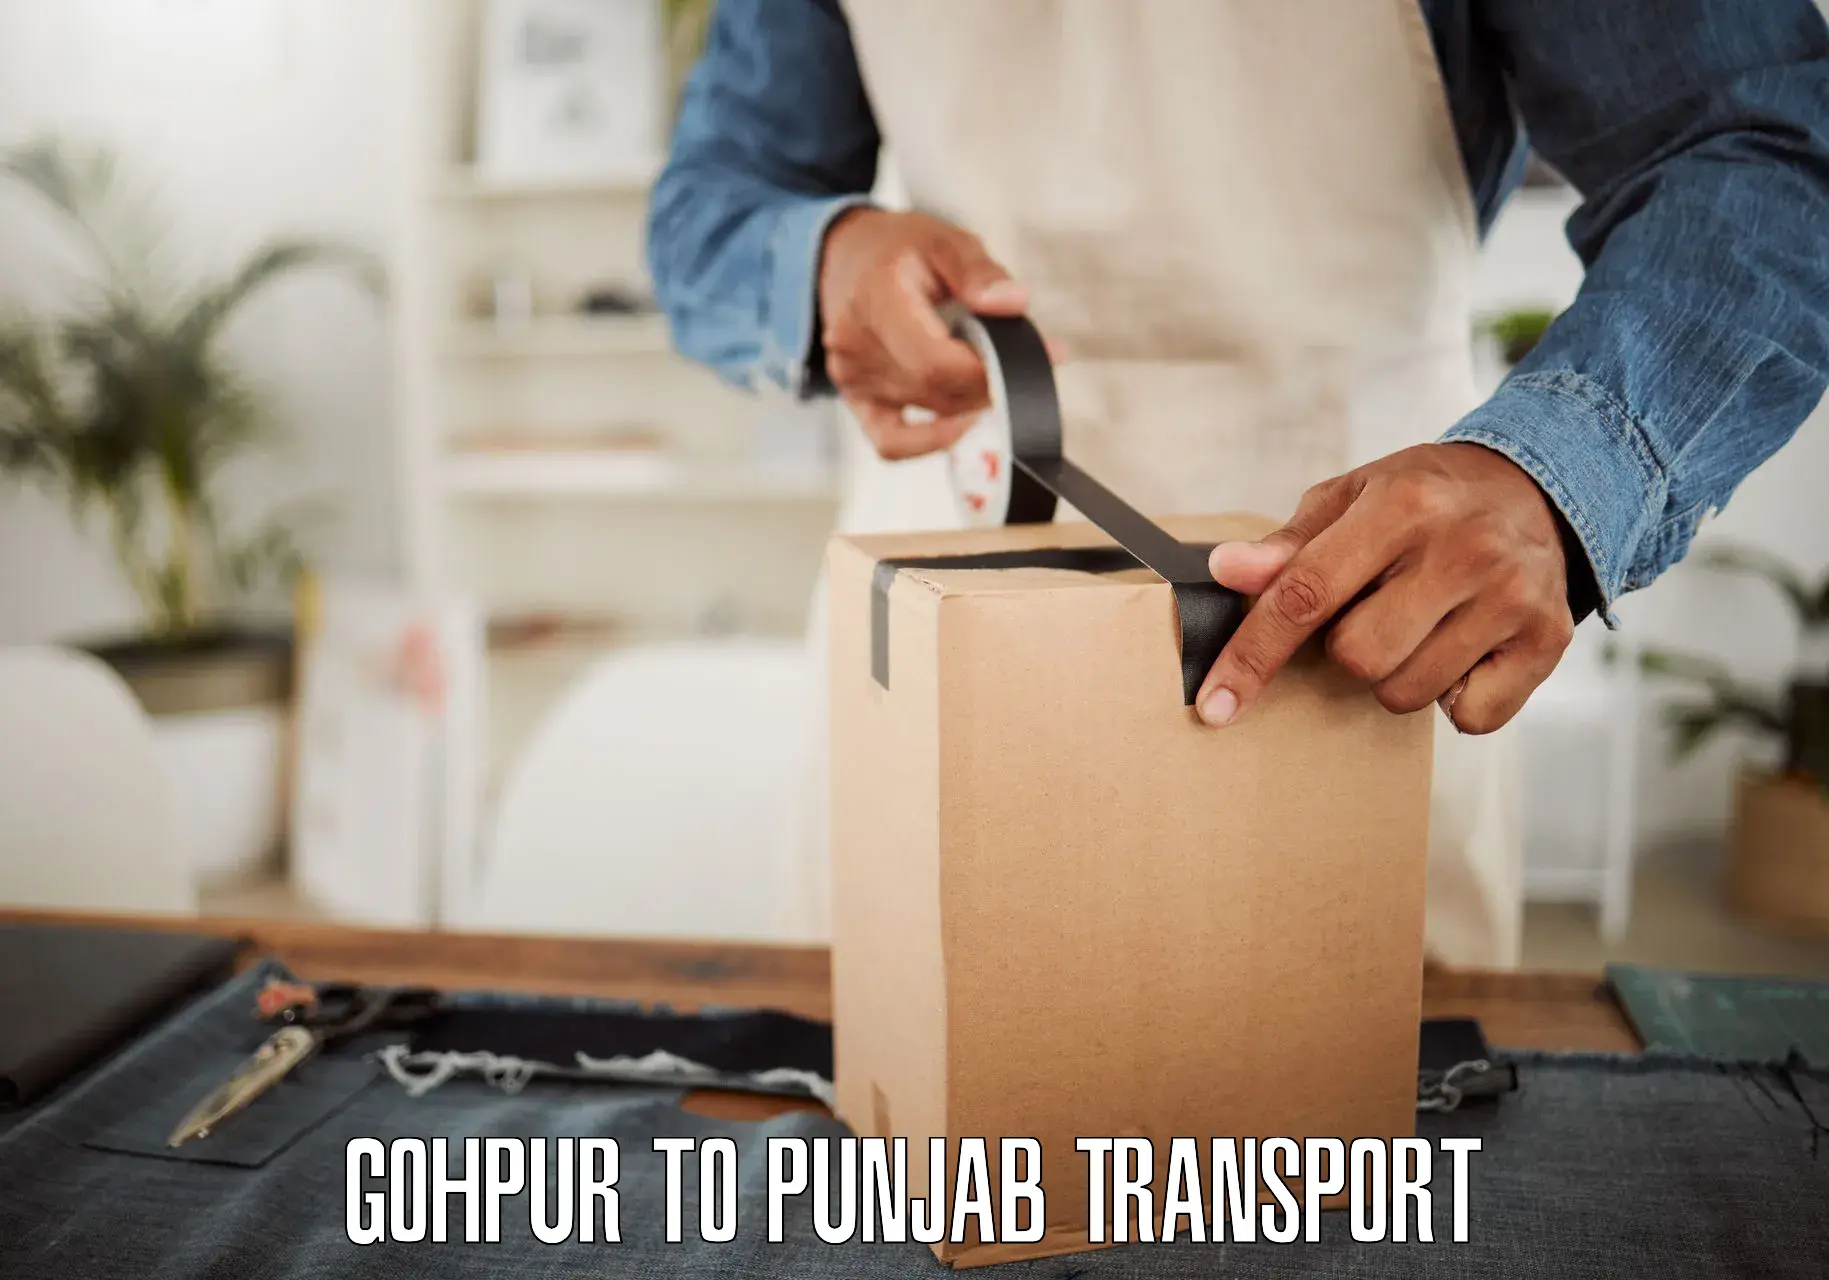 Road transport online services Gohpur to Amritsar